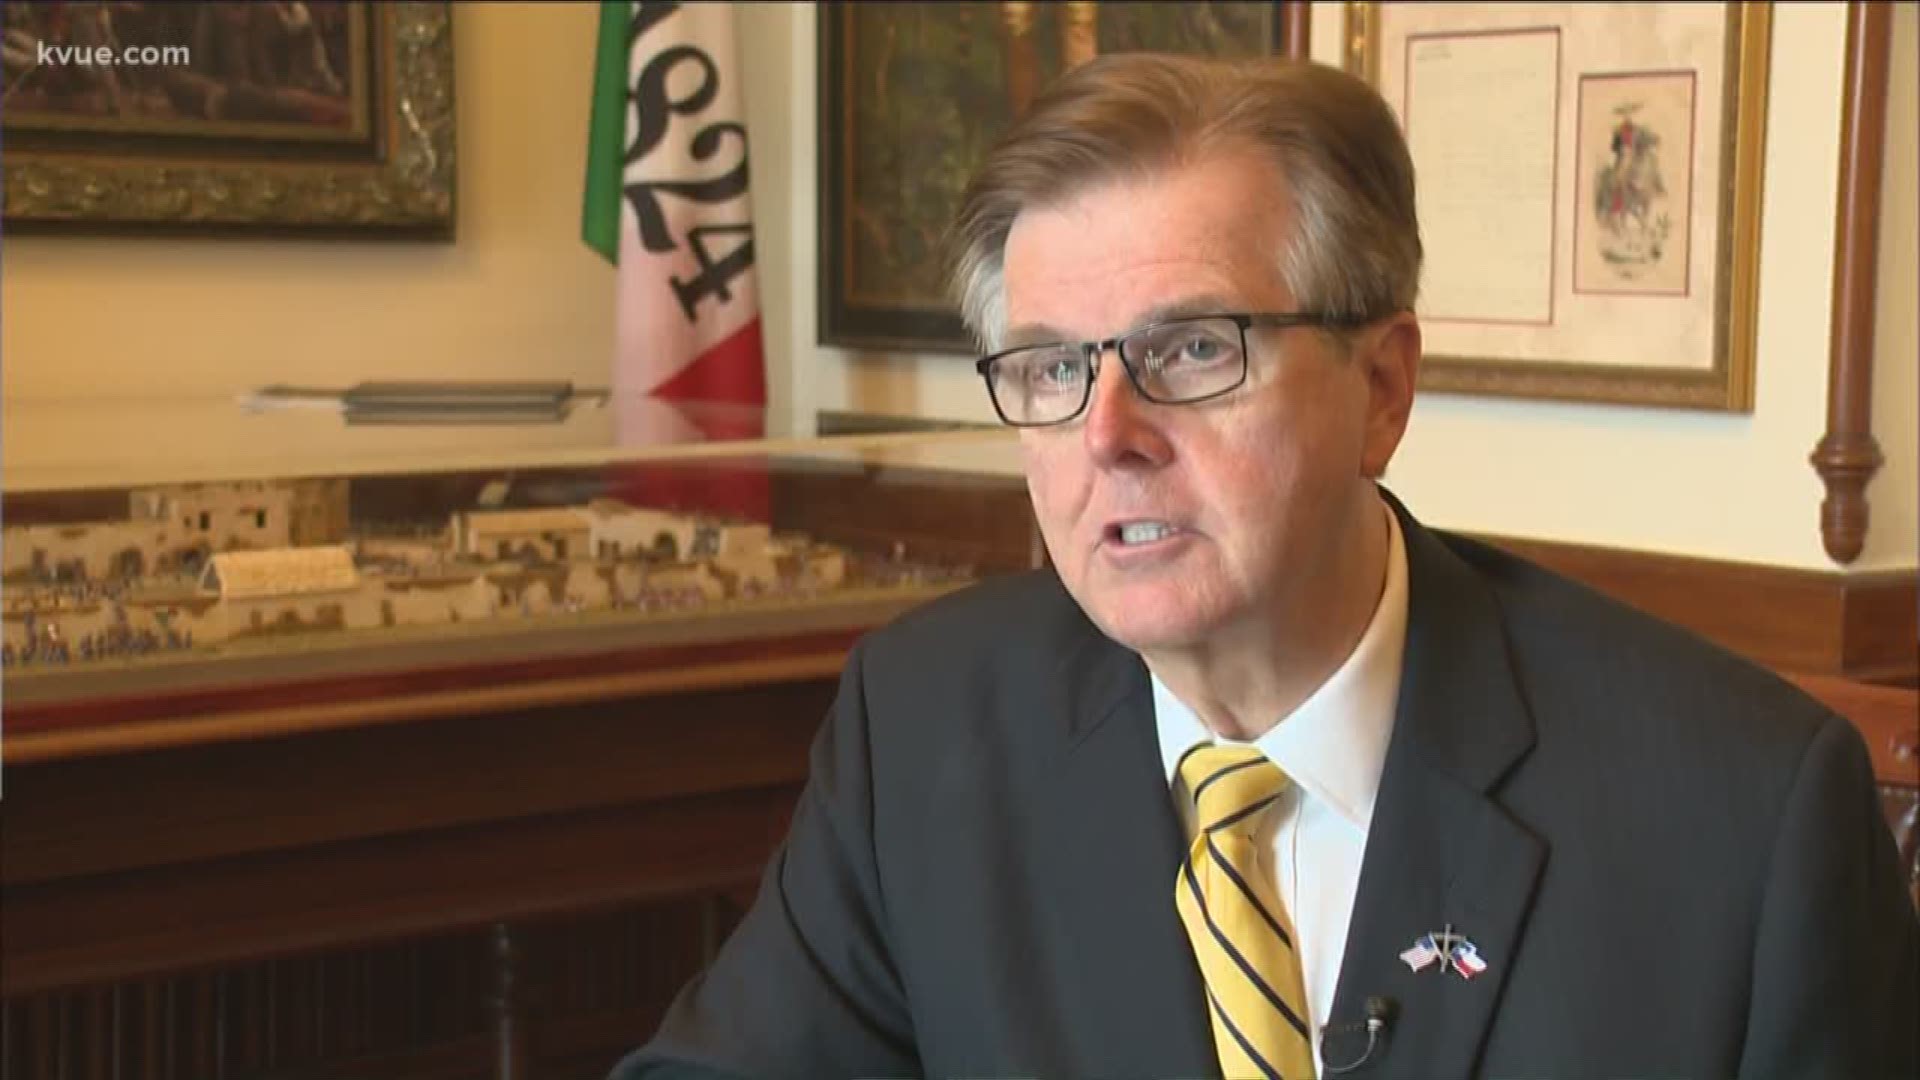 Dan Patrick isn't backing down from a comment that's gotten him a lot of criticism. In fact, he's re-enforcing it.